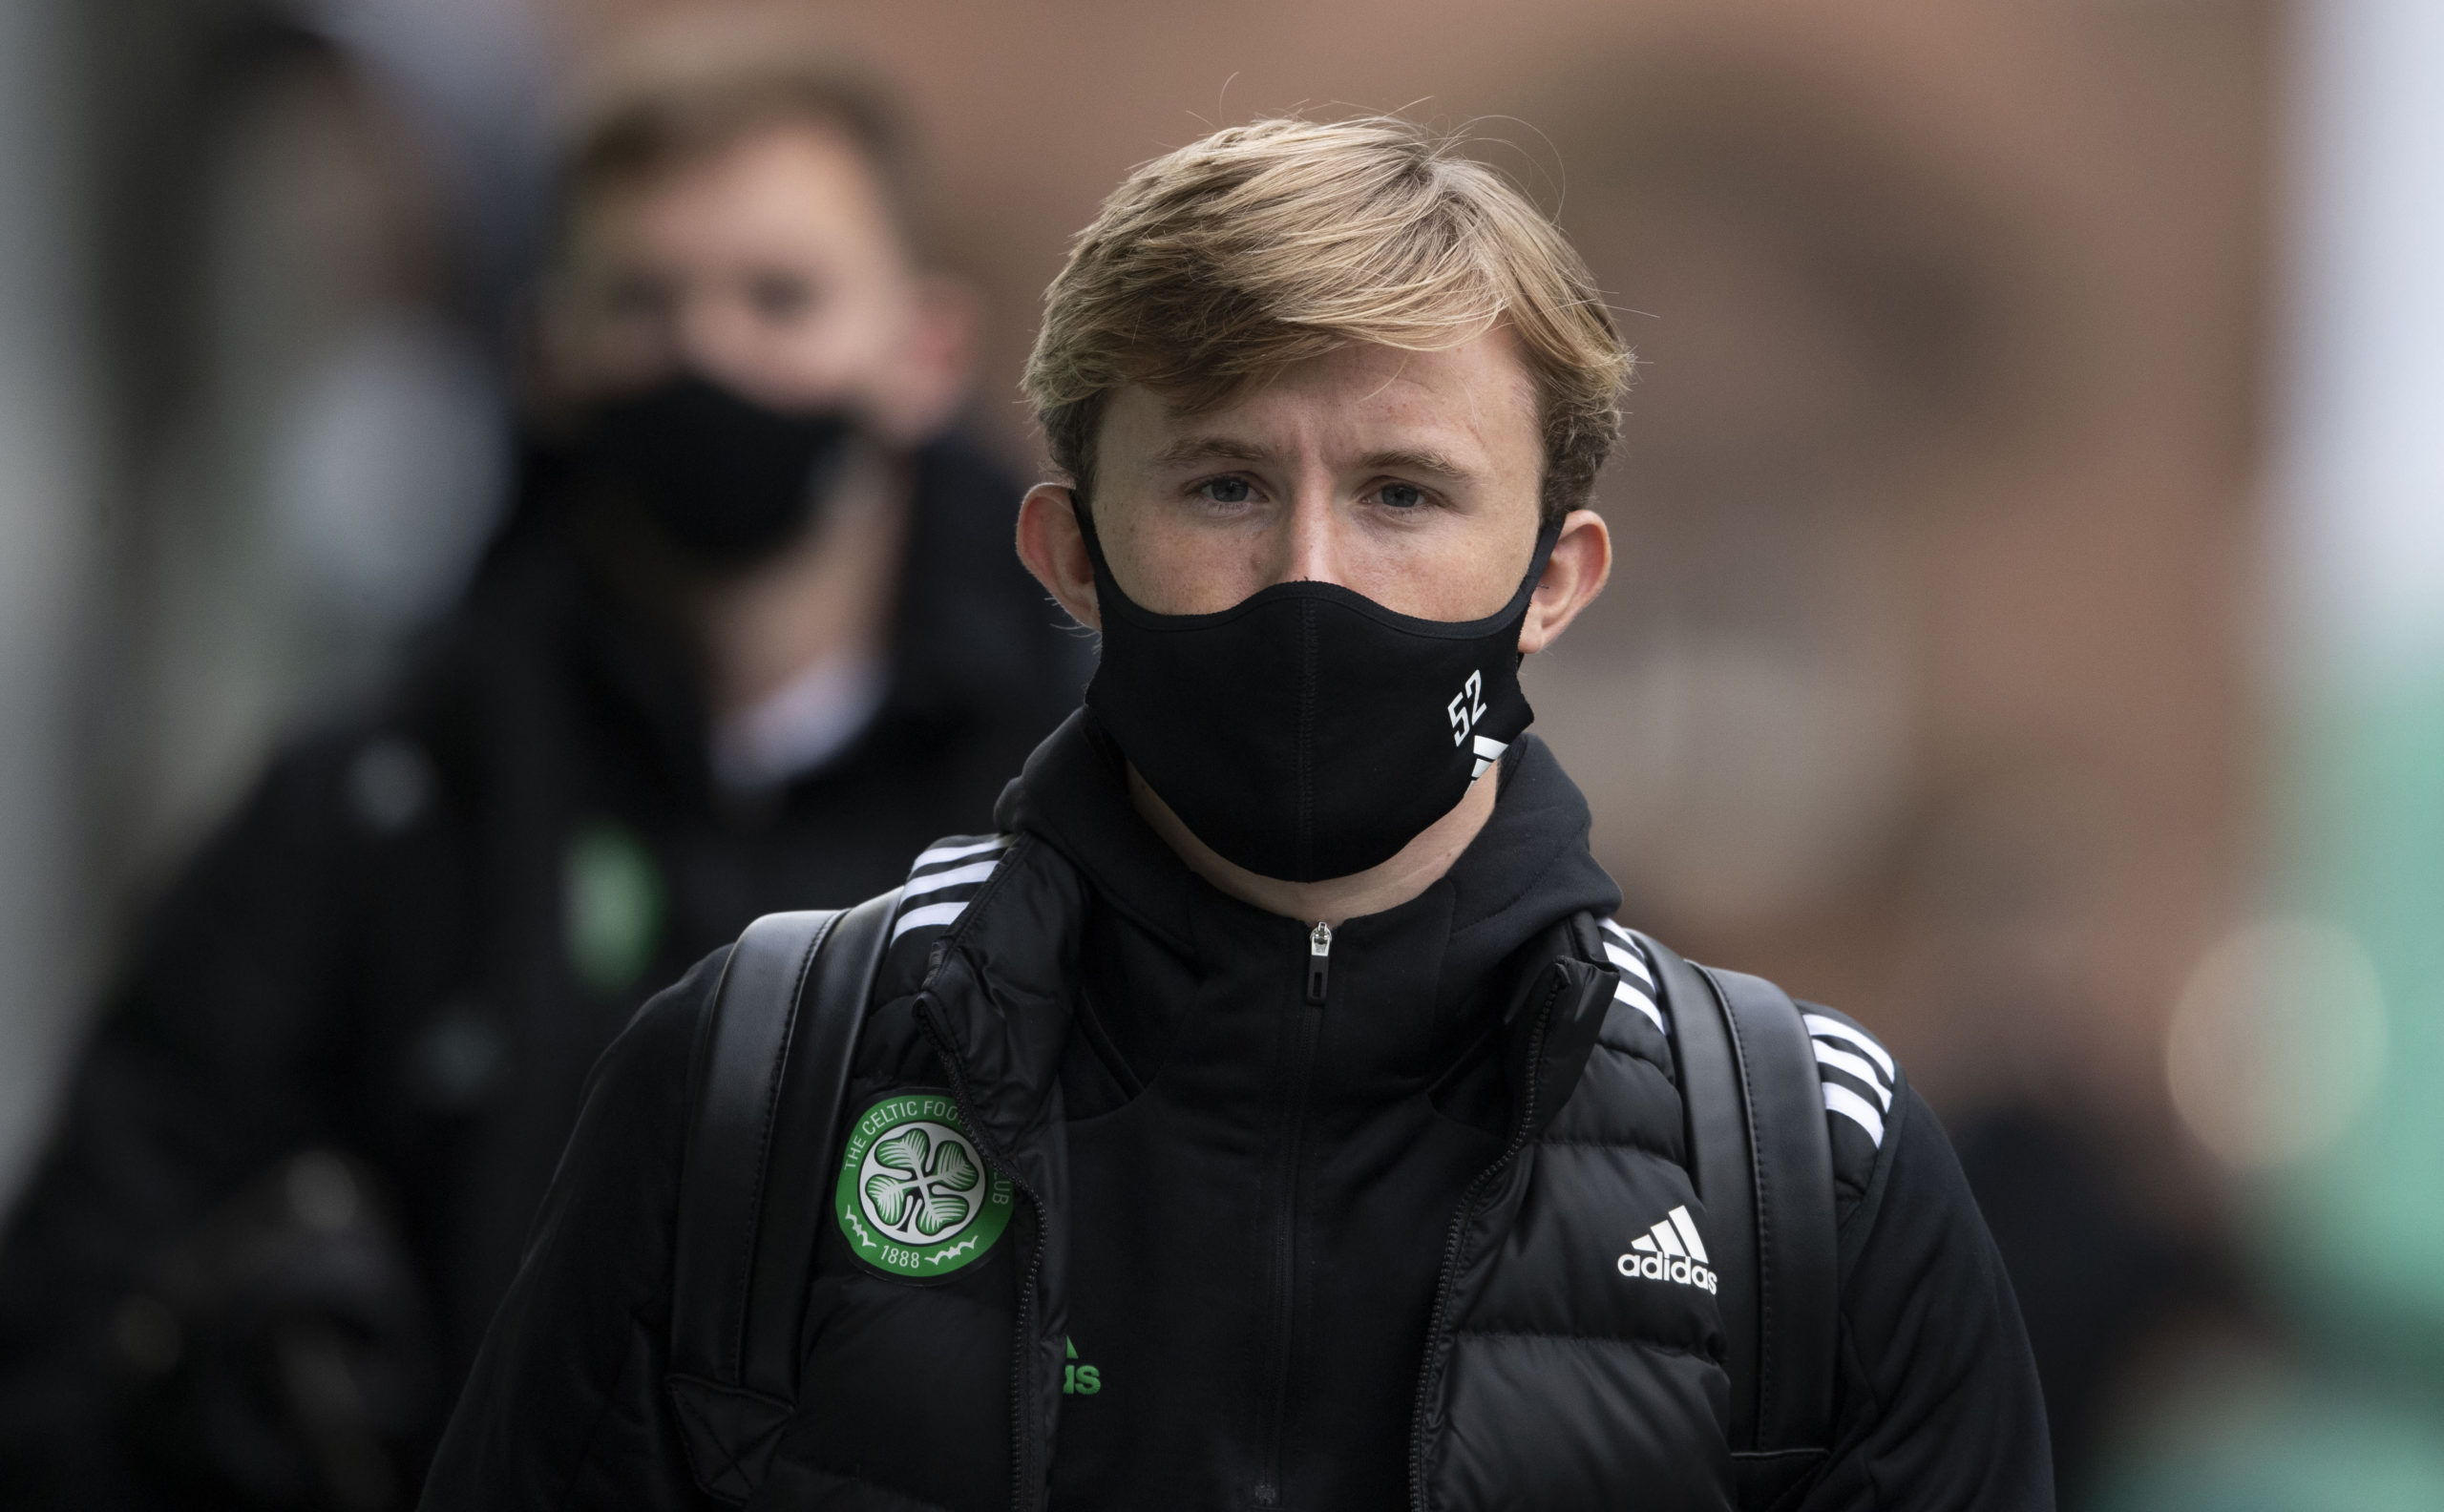 Celtic youngster Ewan Henderson needs game-time; Dundee move is perfect